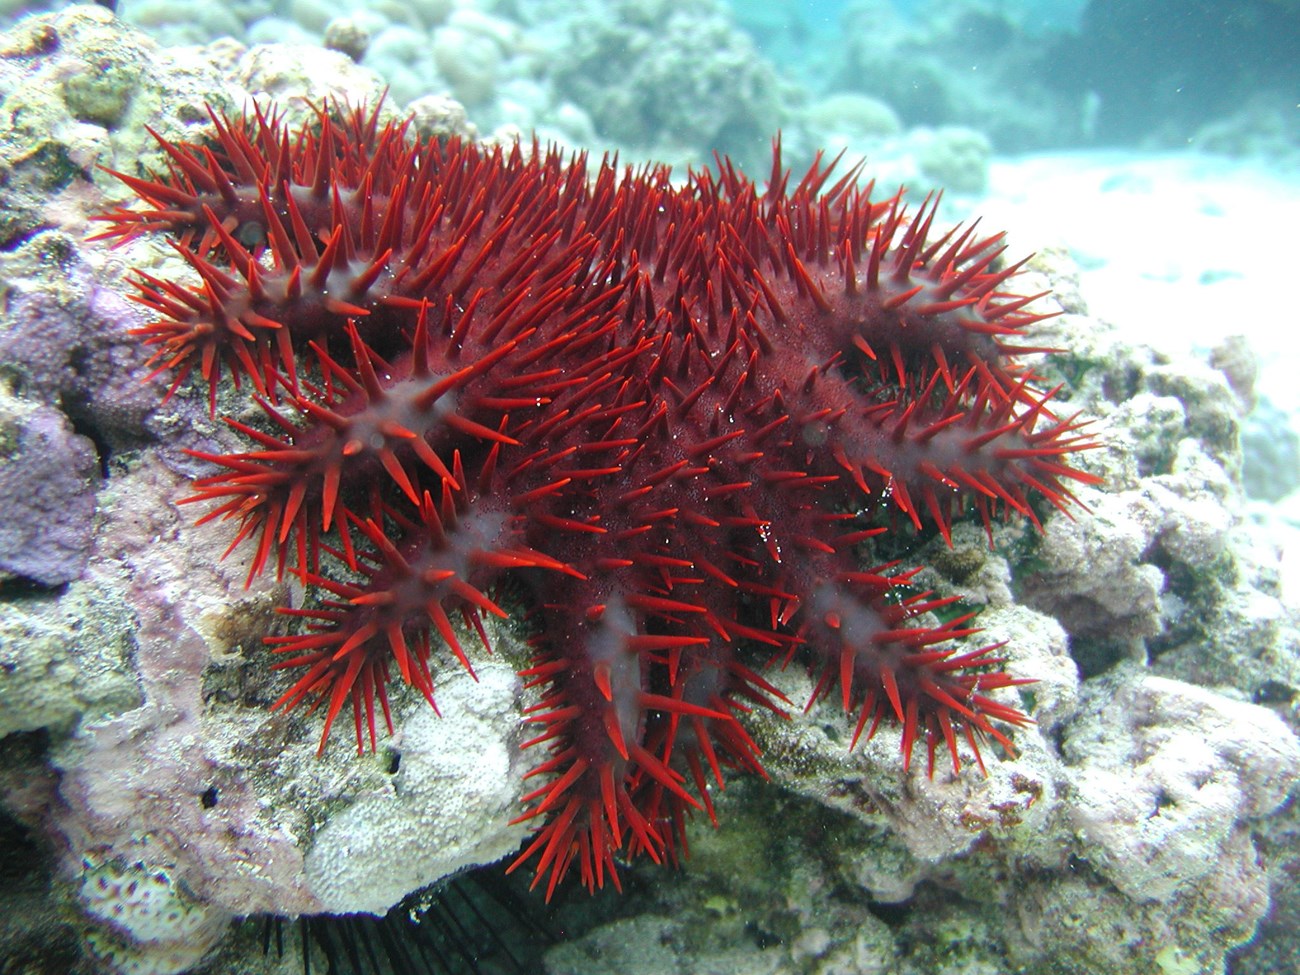 A large red spiky sea star crawling over degraded corals.